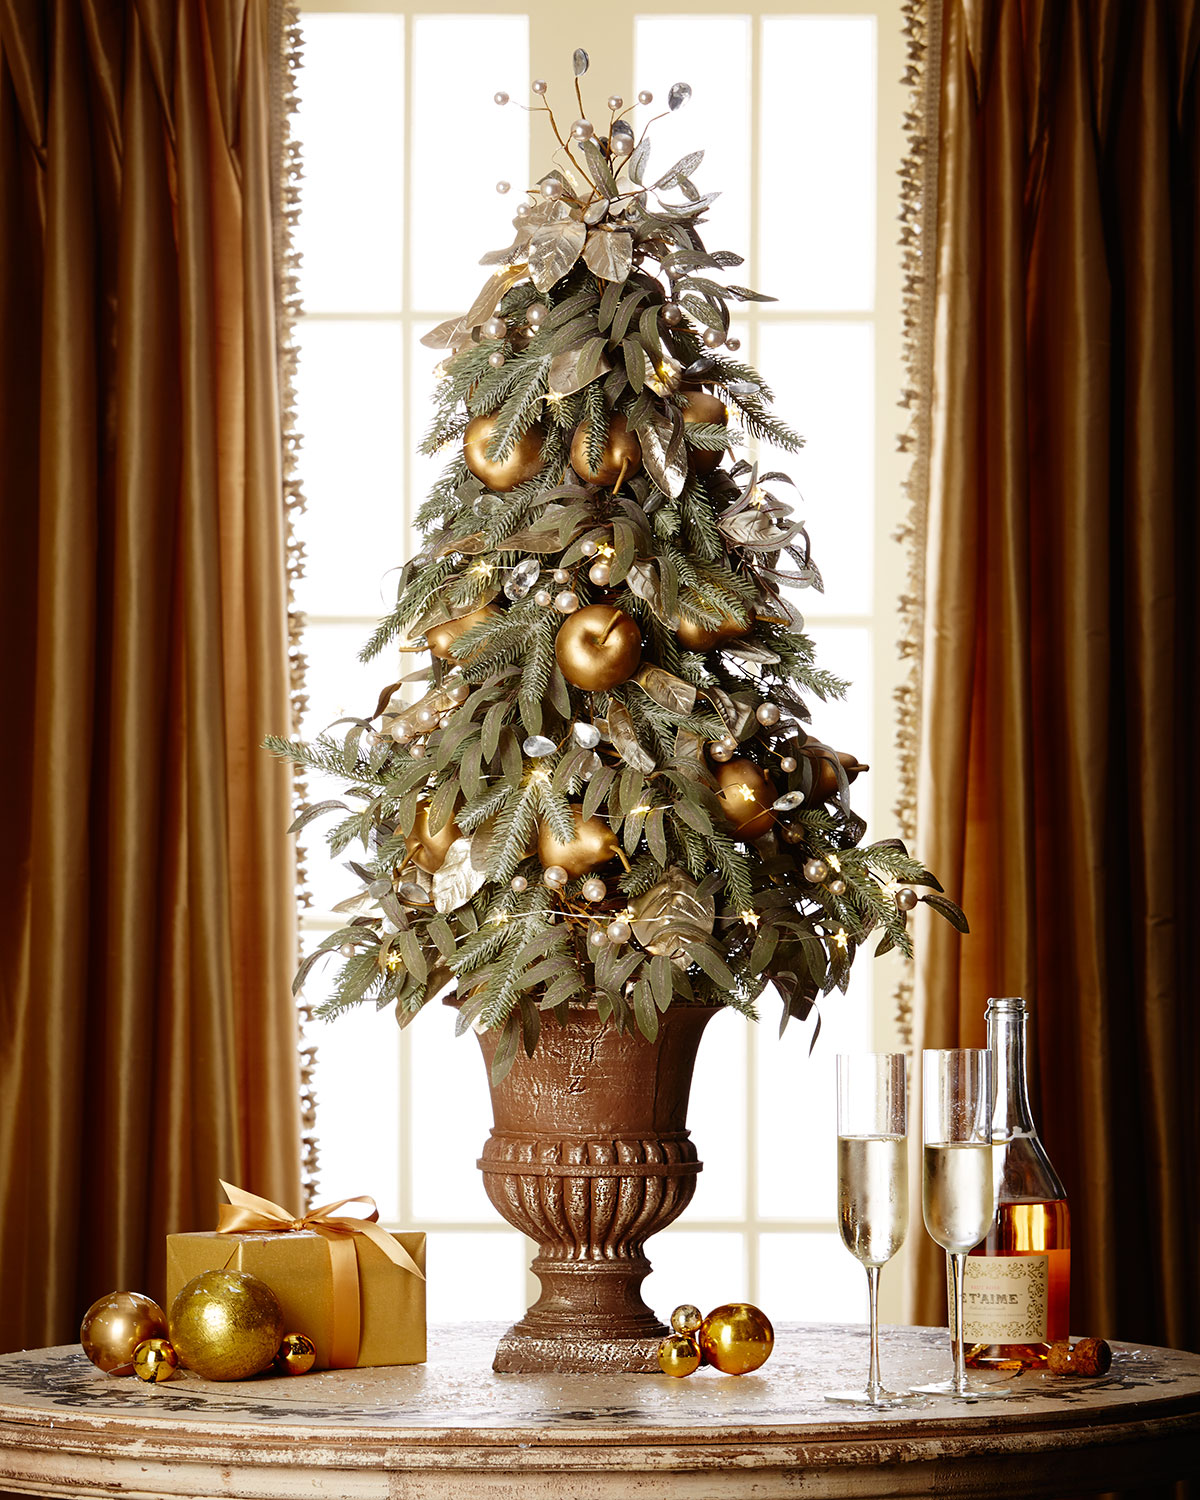 Traditional-And-Unusual-Christmas-Tree-Décor-Ideas_25